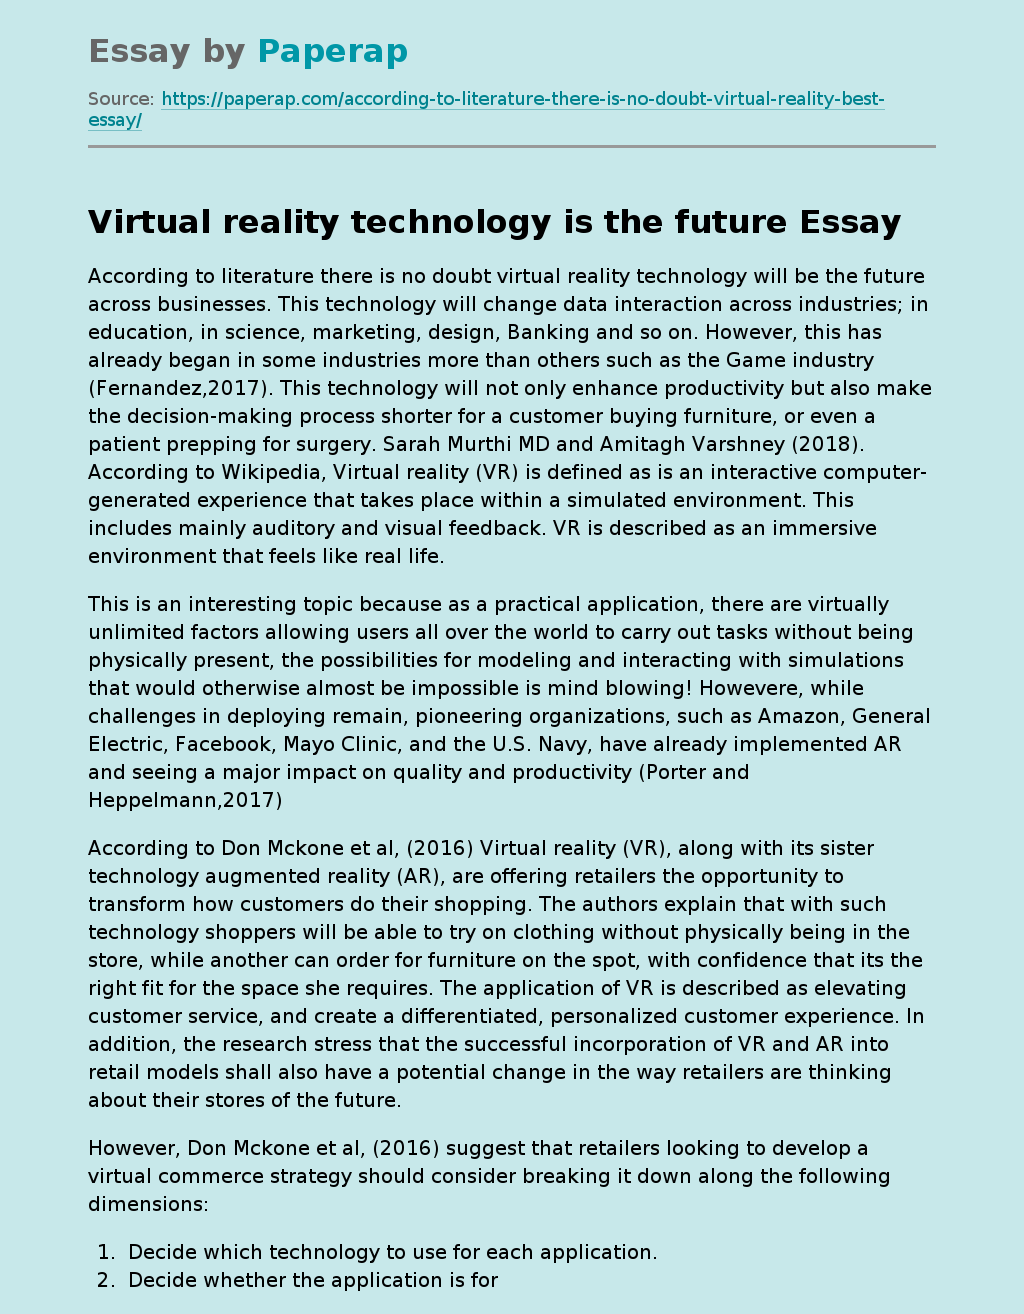 Virtual reality technology is the future